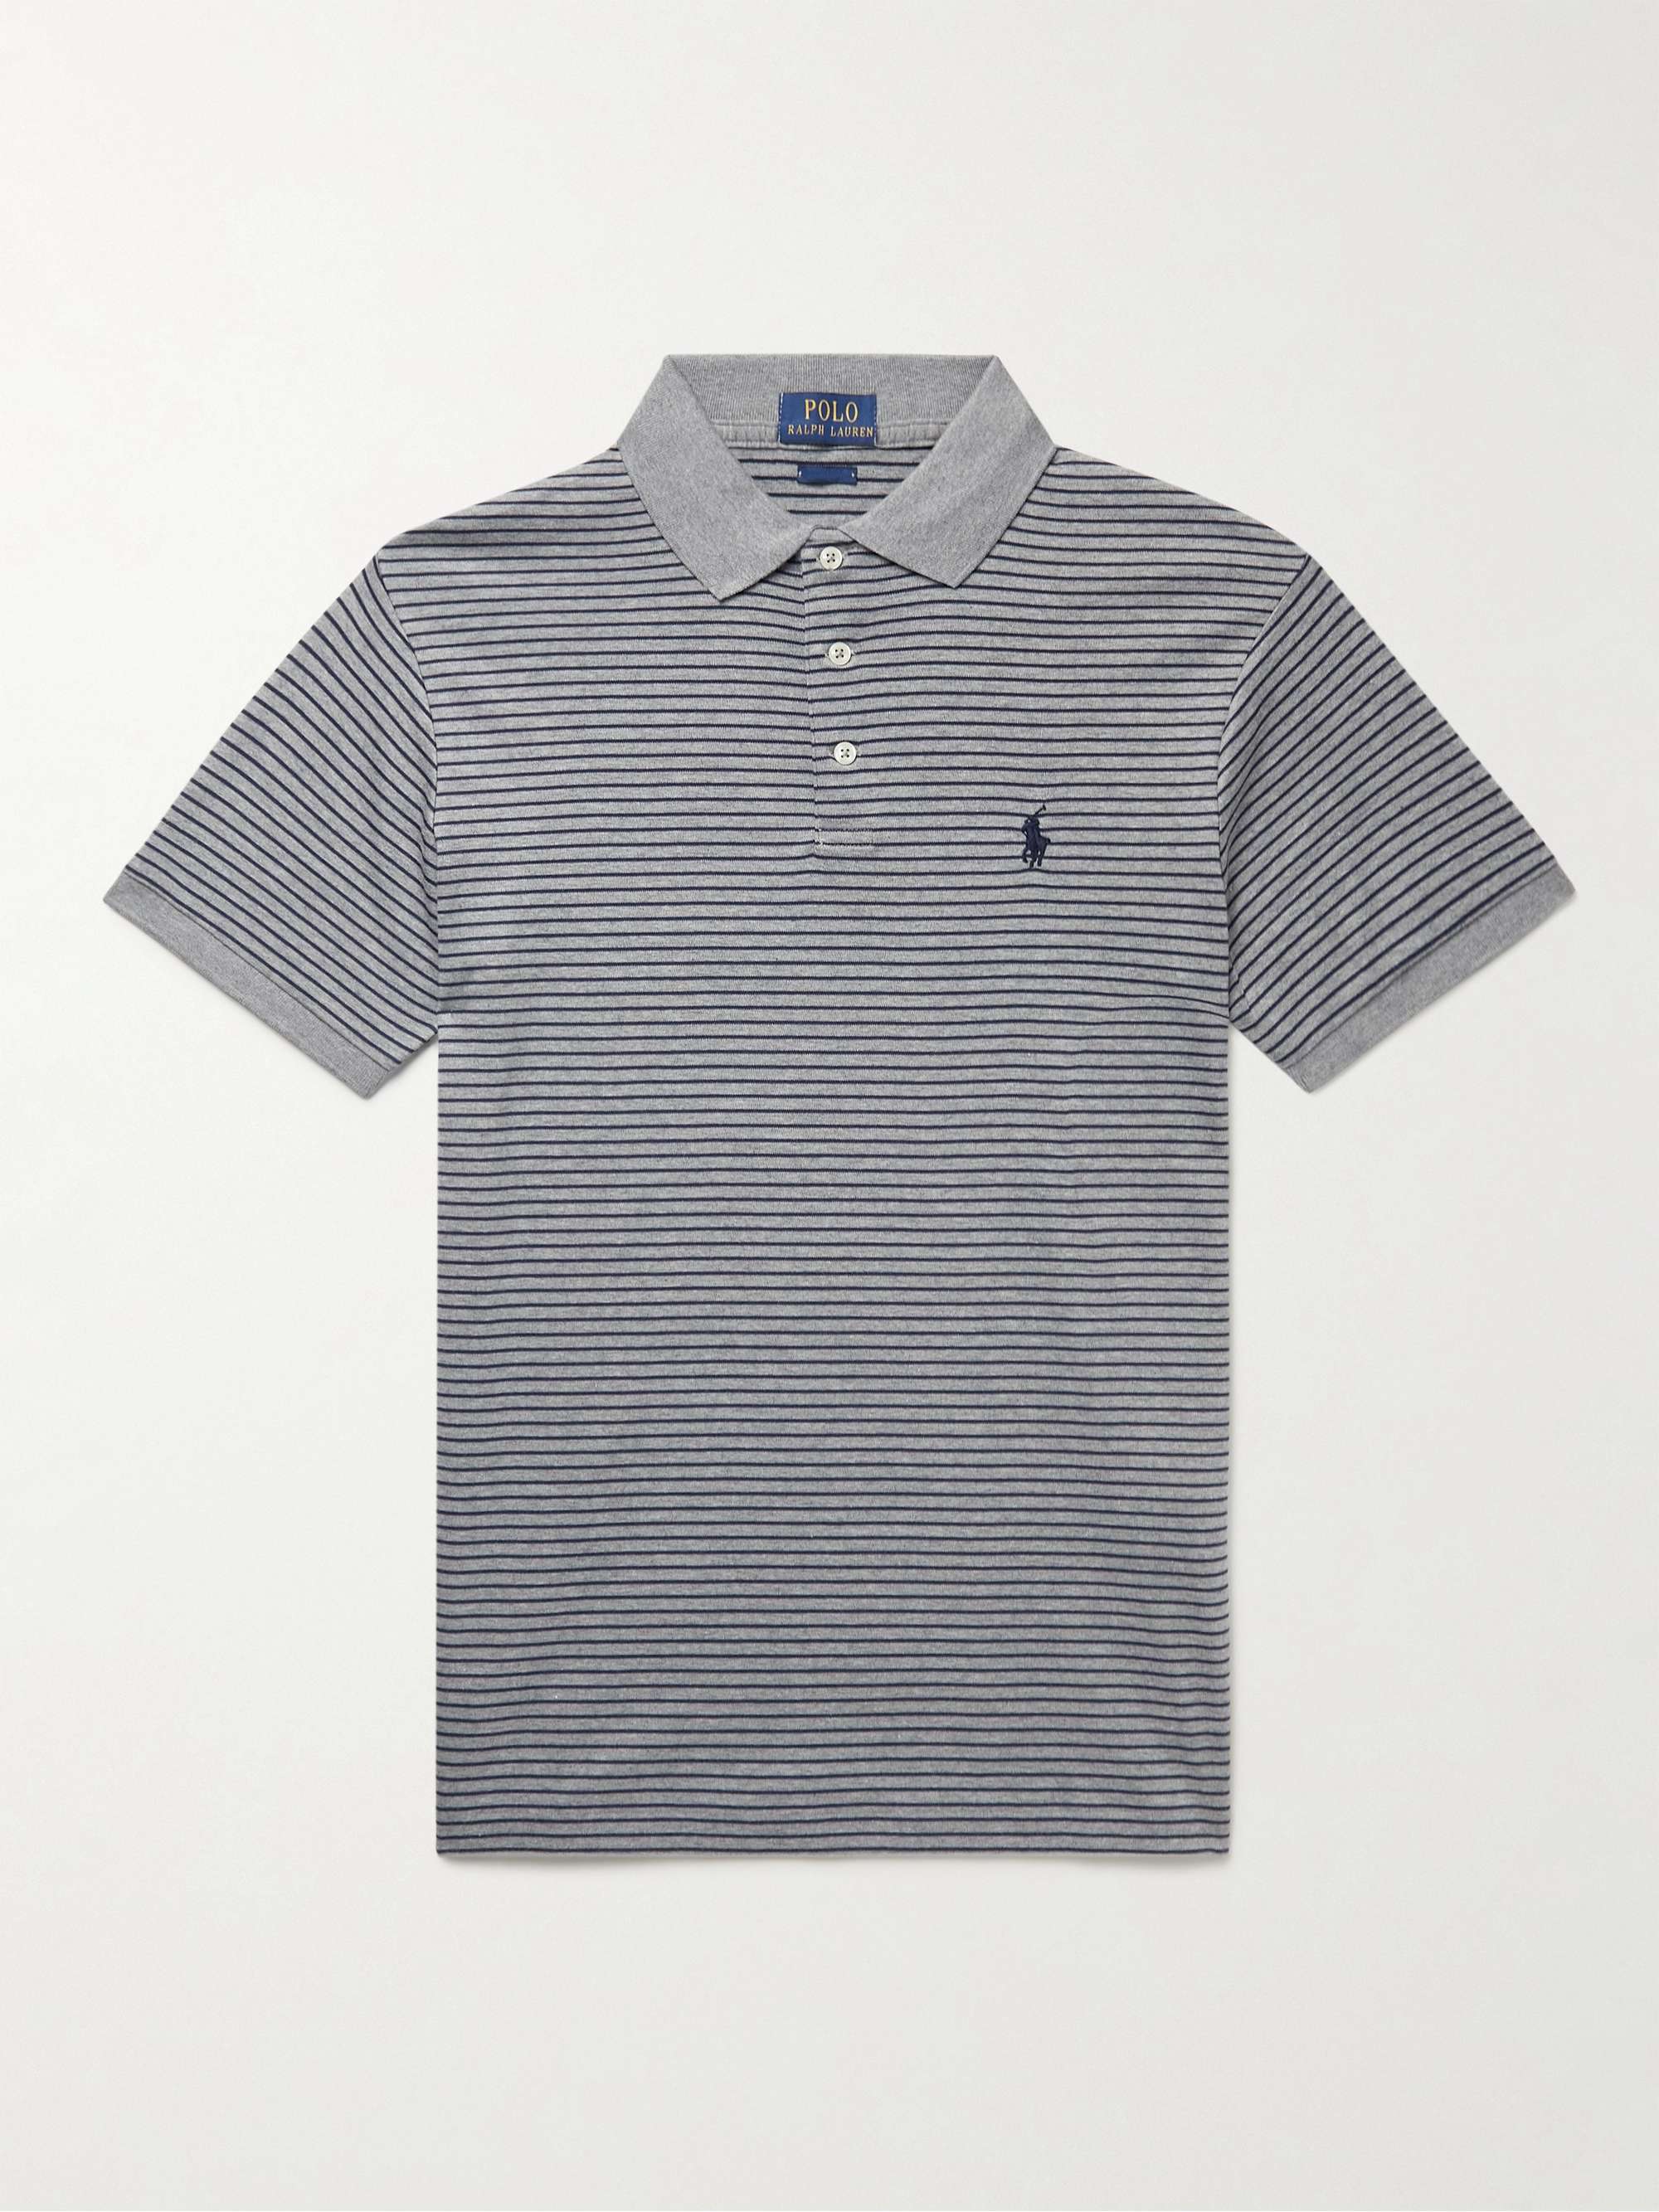 POLO RALPH LAUREN Slim-Fit Logo-Embroidered Striped Cotton Polo Shirt